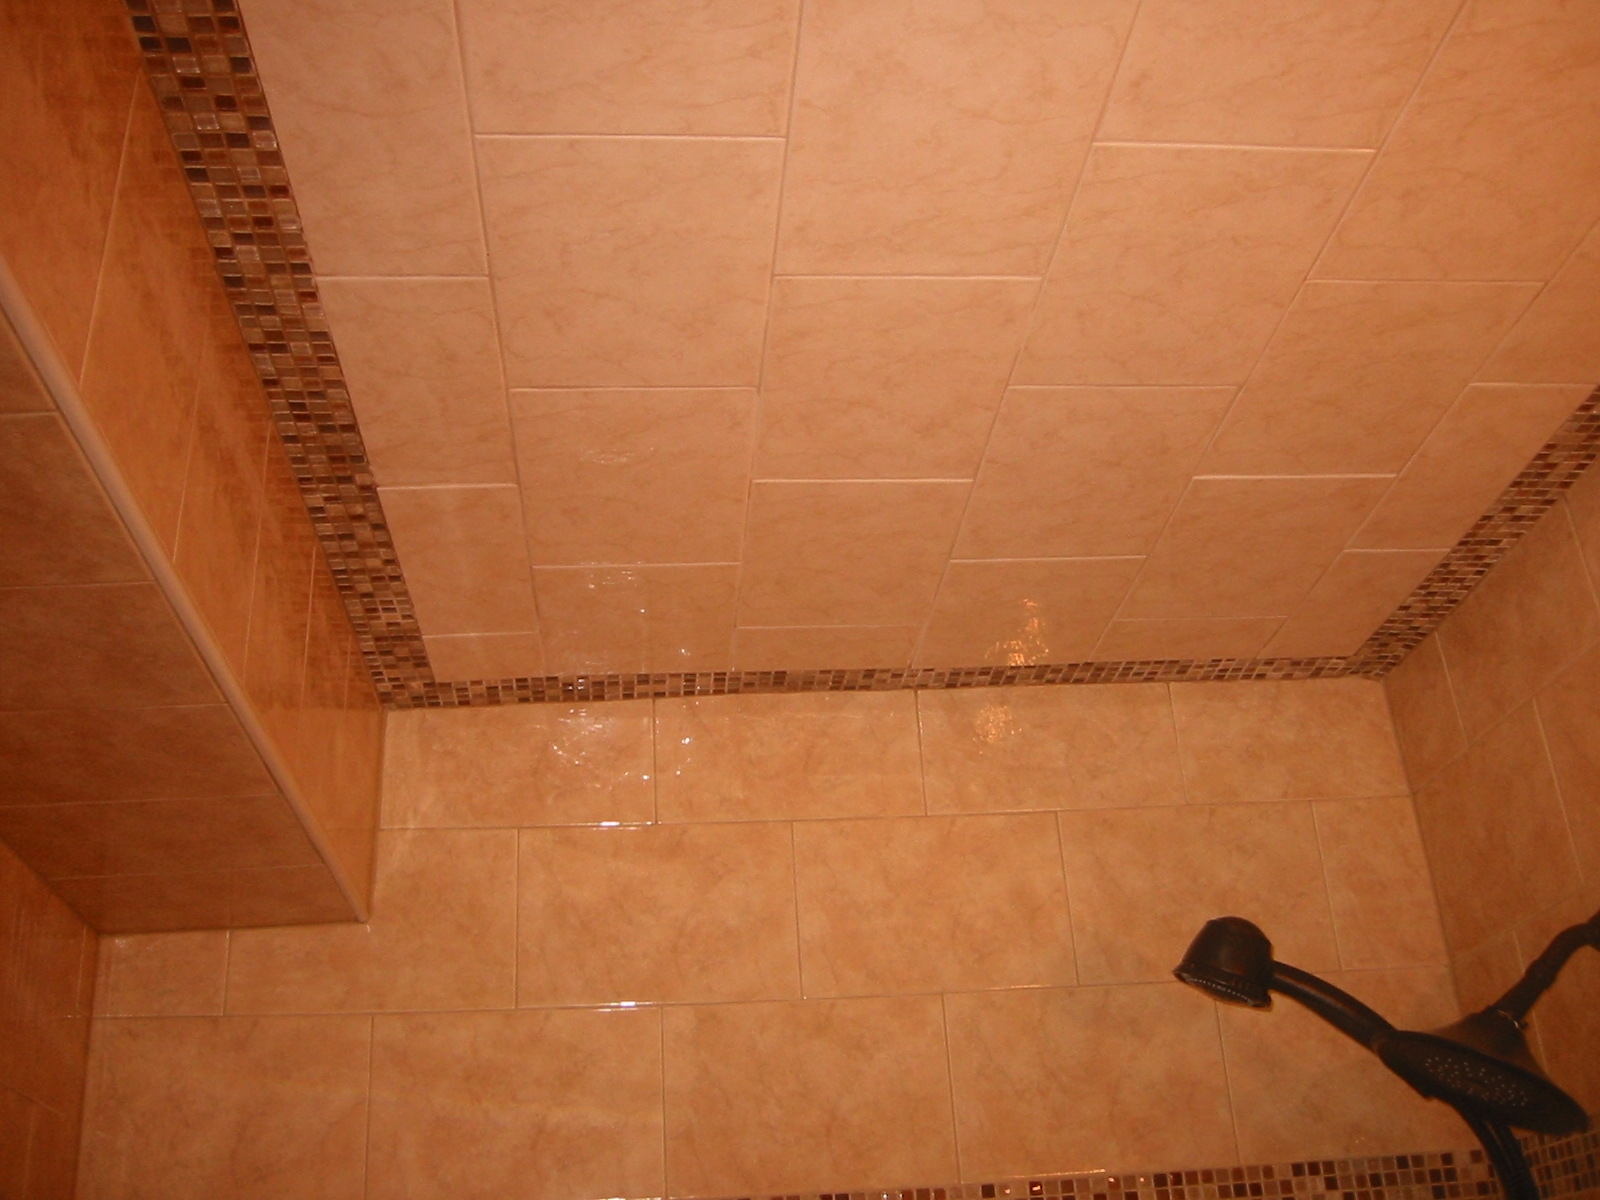 Floor Tiles On Ceiling Floor Tiles On Ceiling ceramic tiles on the ceiling bath tub area all about tile 1600 X 1200